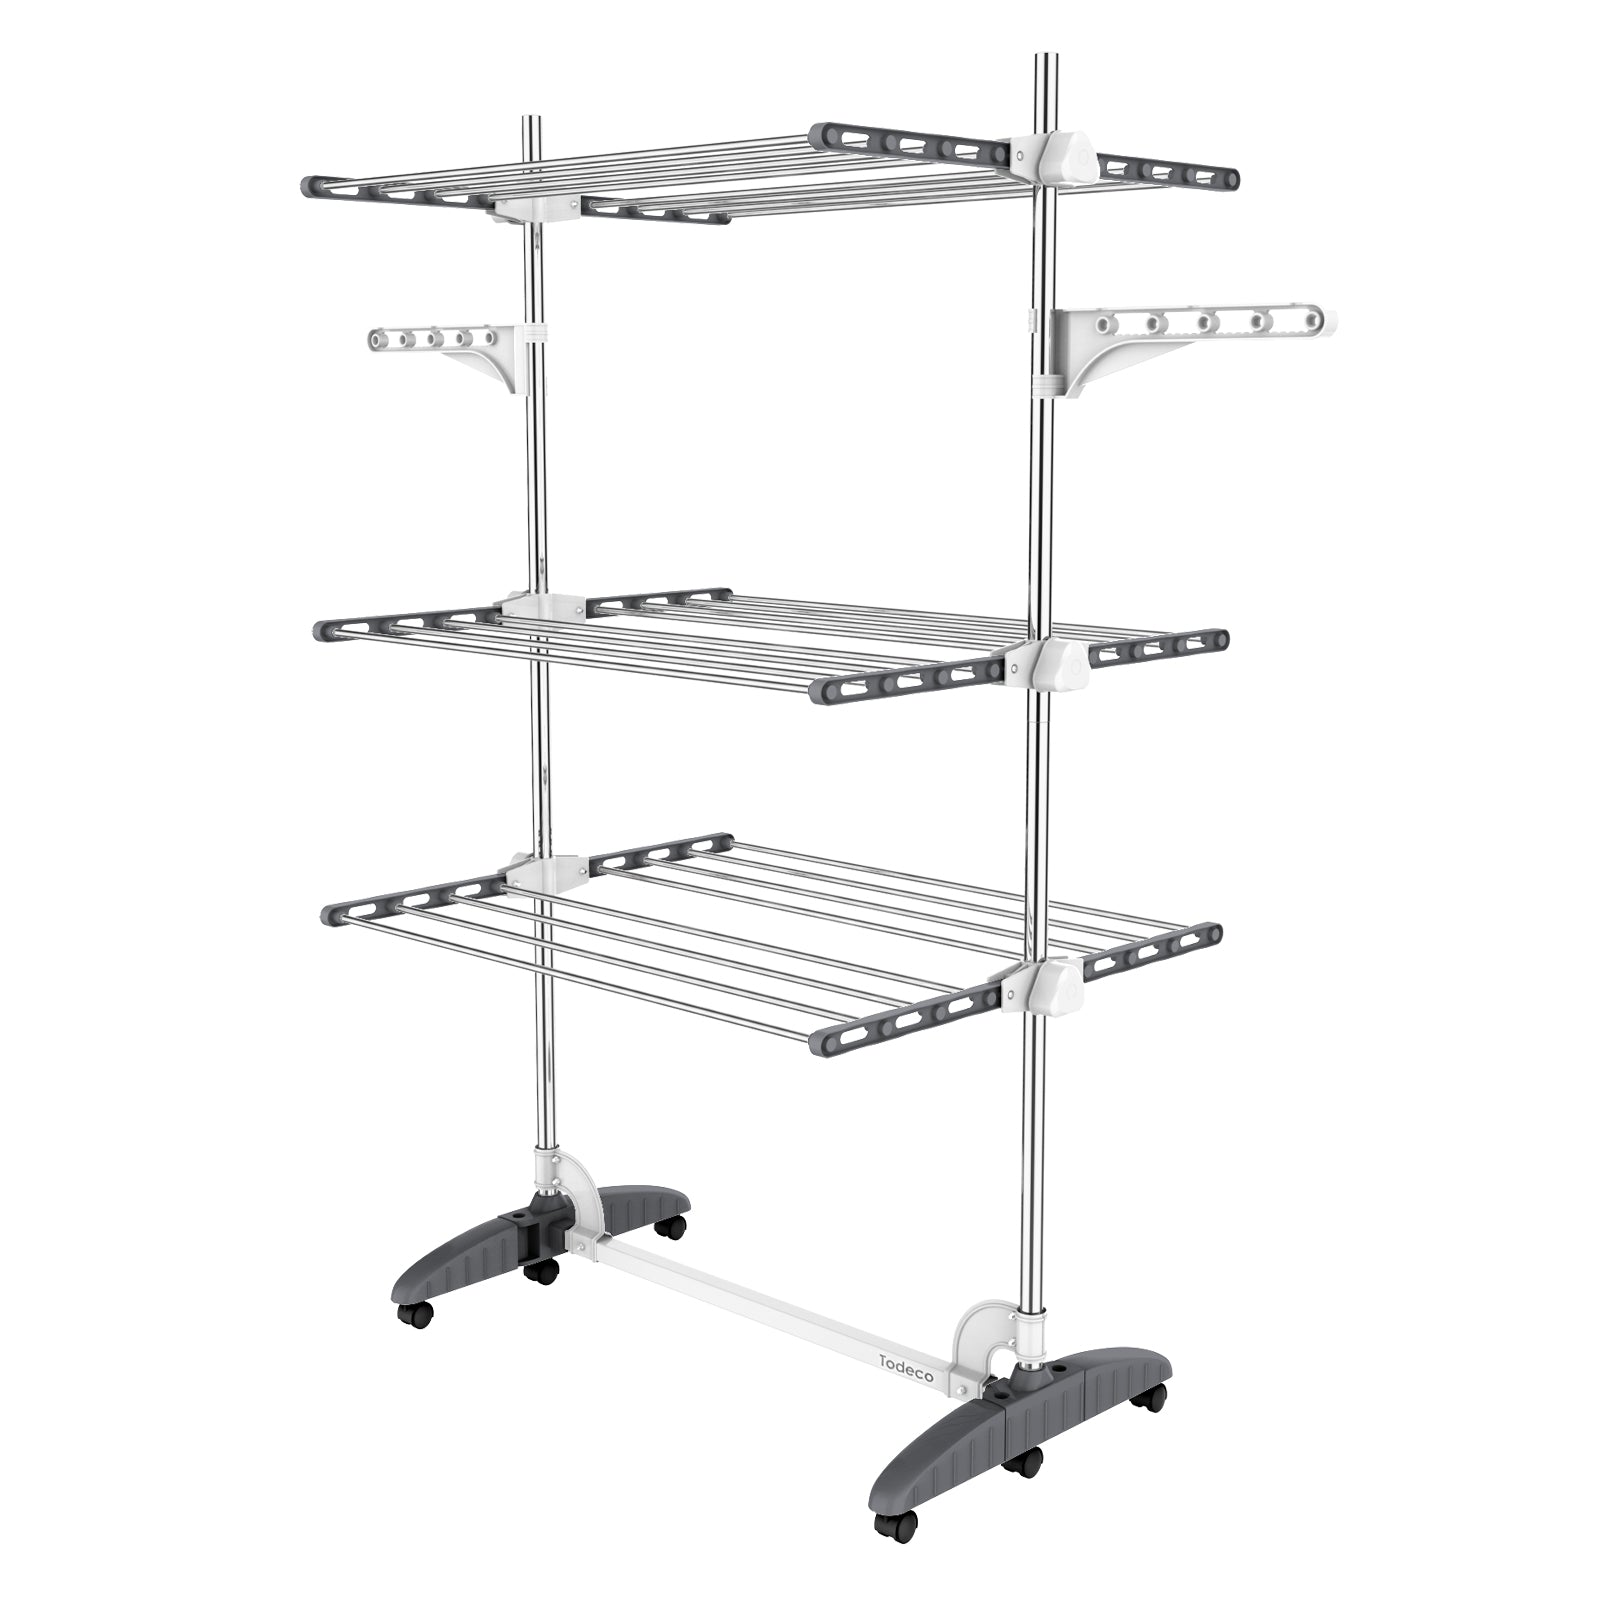 Clothes Drying Rack, 3 shelves (wings, Grey/White)